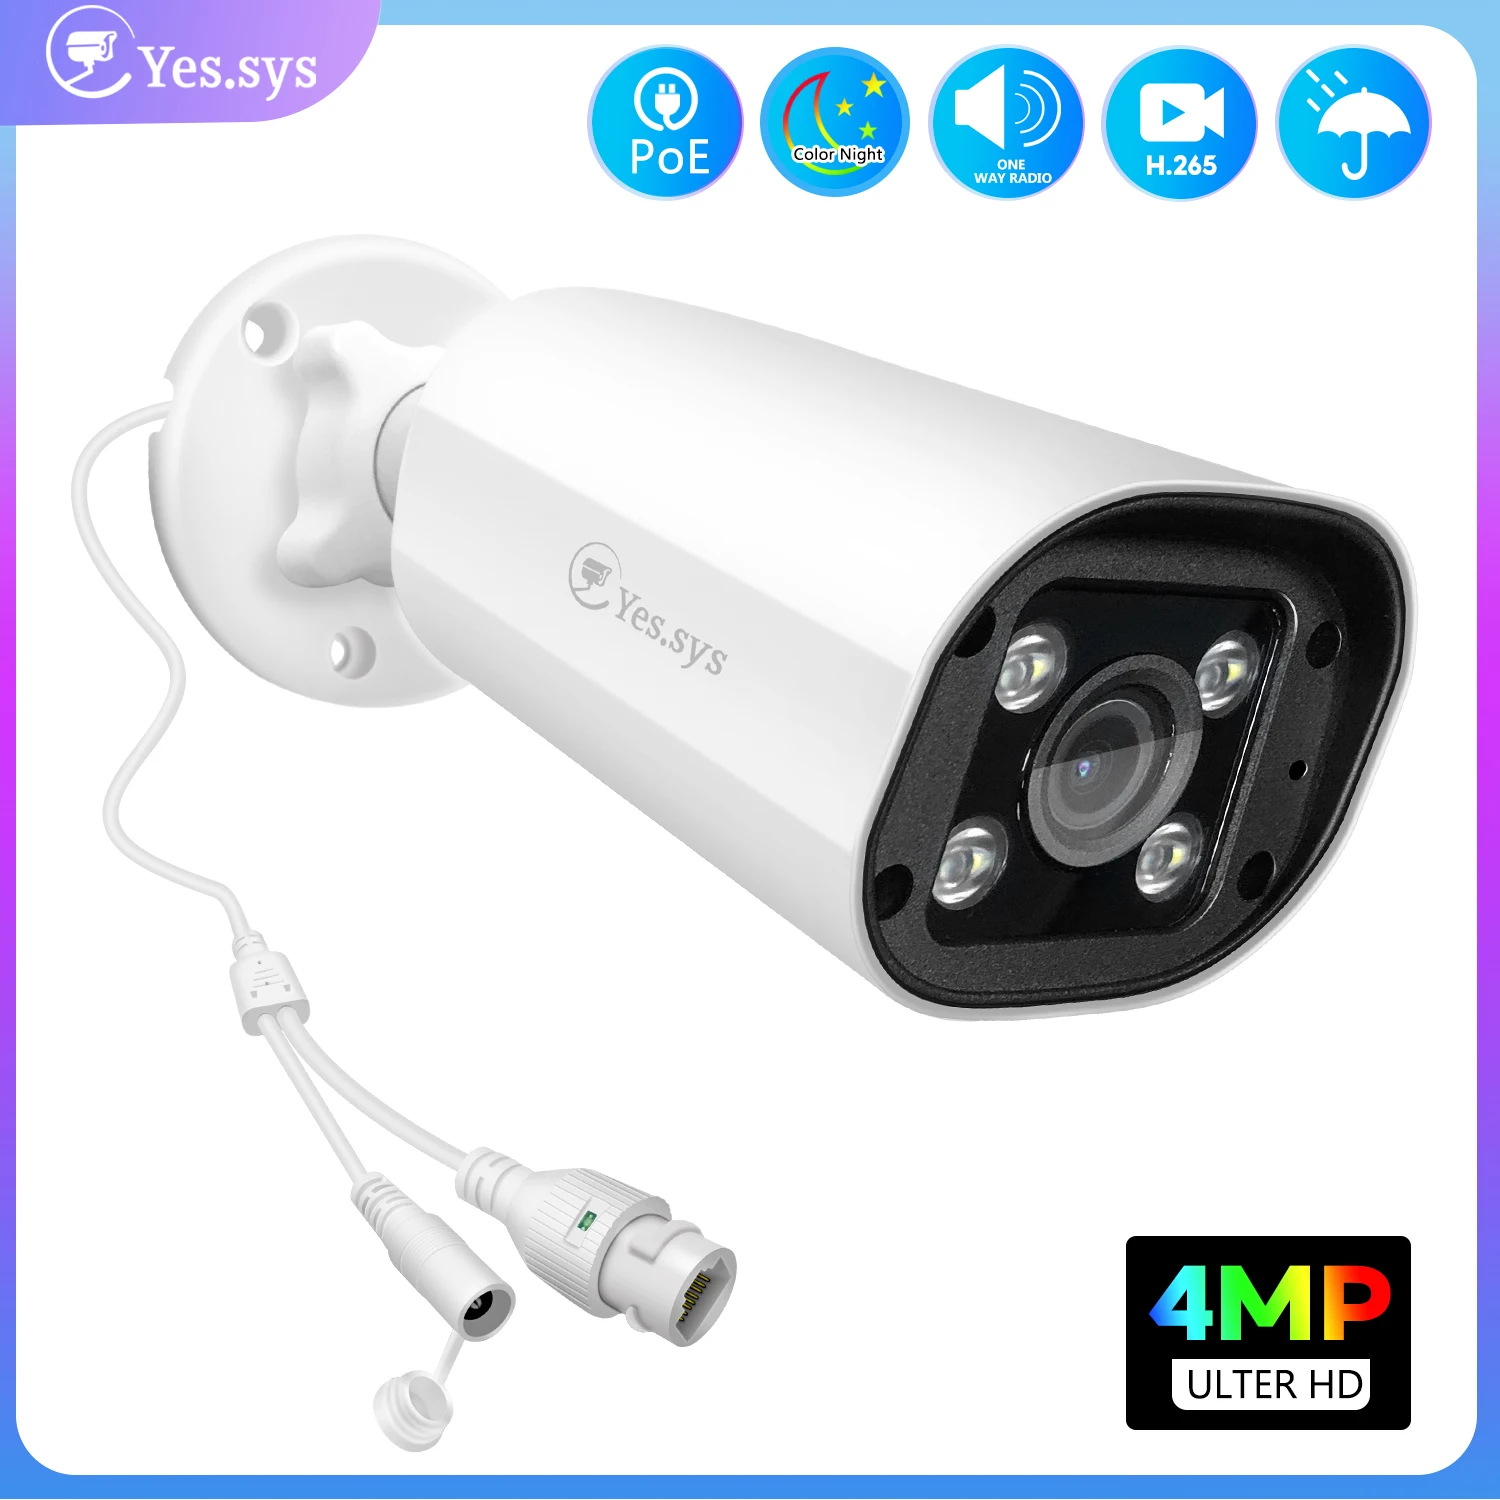 Eyes.sys 4MP IP PoE Aduio Bullet Security Camera, AI Human Body Detection 4 LED Color Night Vision Compatible Hikvision NVR RTSP